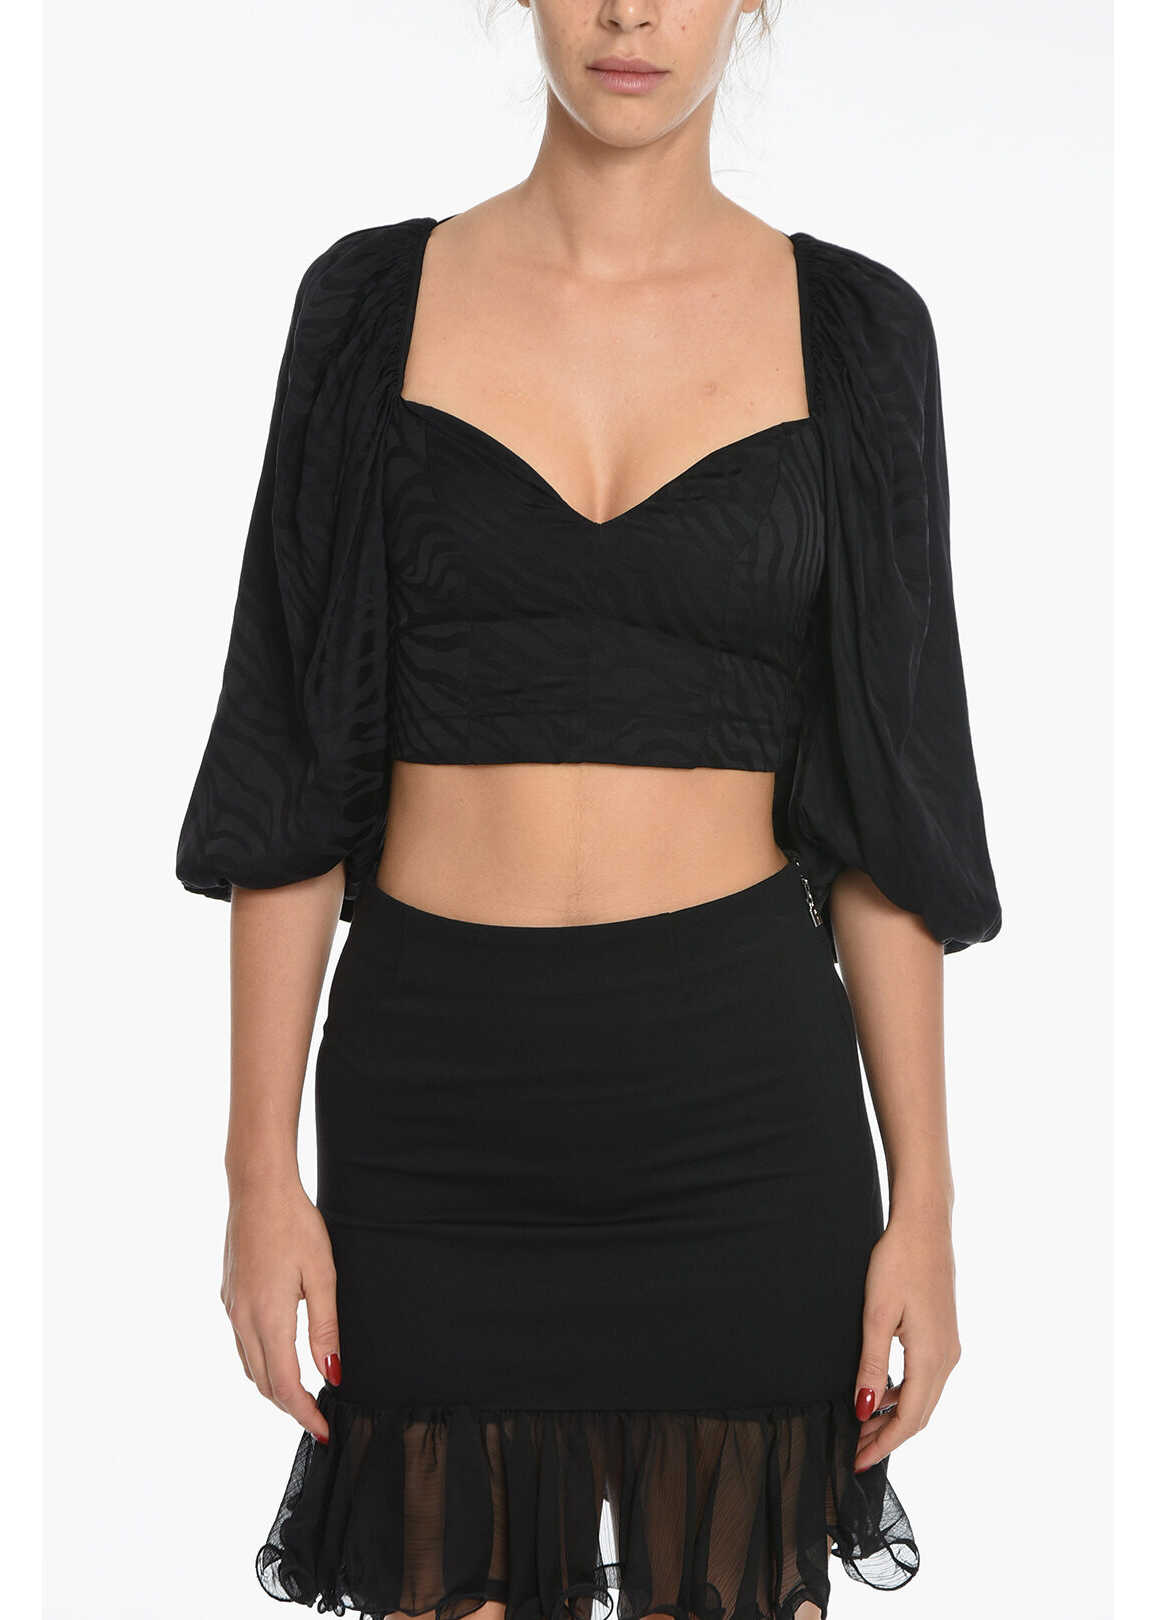 ROTATE Birger Christensen Animal Patterned Solid Color Irina Crop Top With Puff Sleeve Black